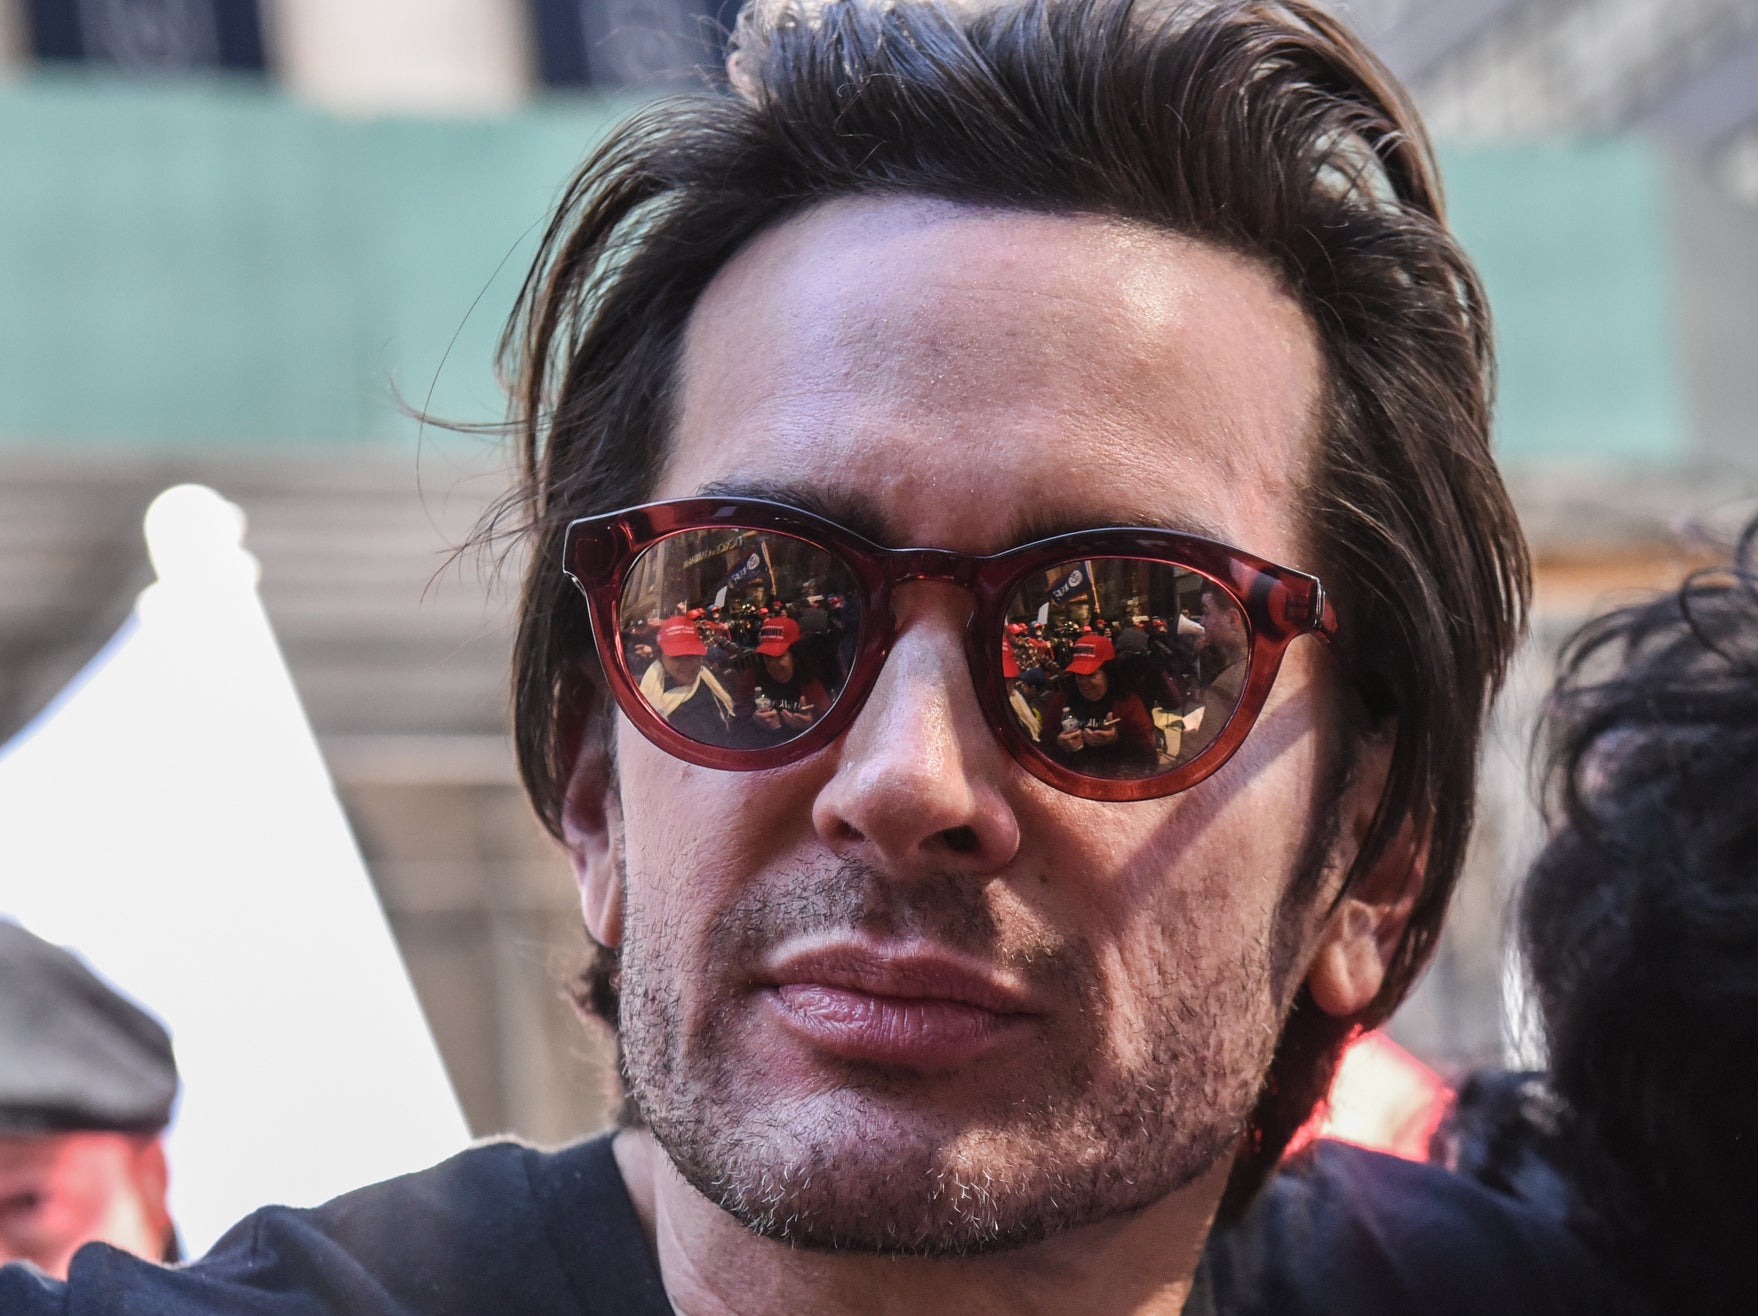 Brandon Straka, founder of the ‘WalkAway’ movement, attends a rally in support of U.S. President Donald Trump near Trump Tower on 23 March, 2019